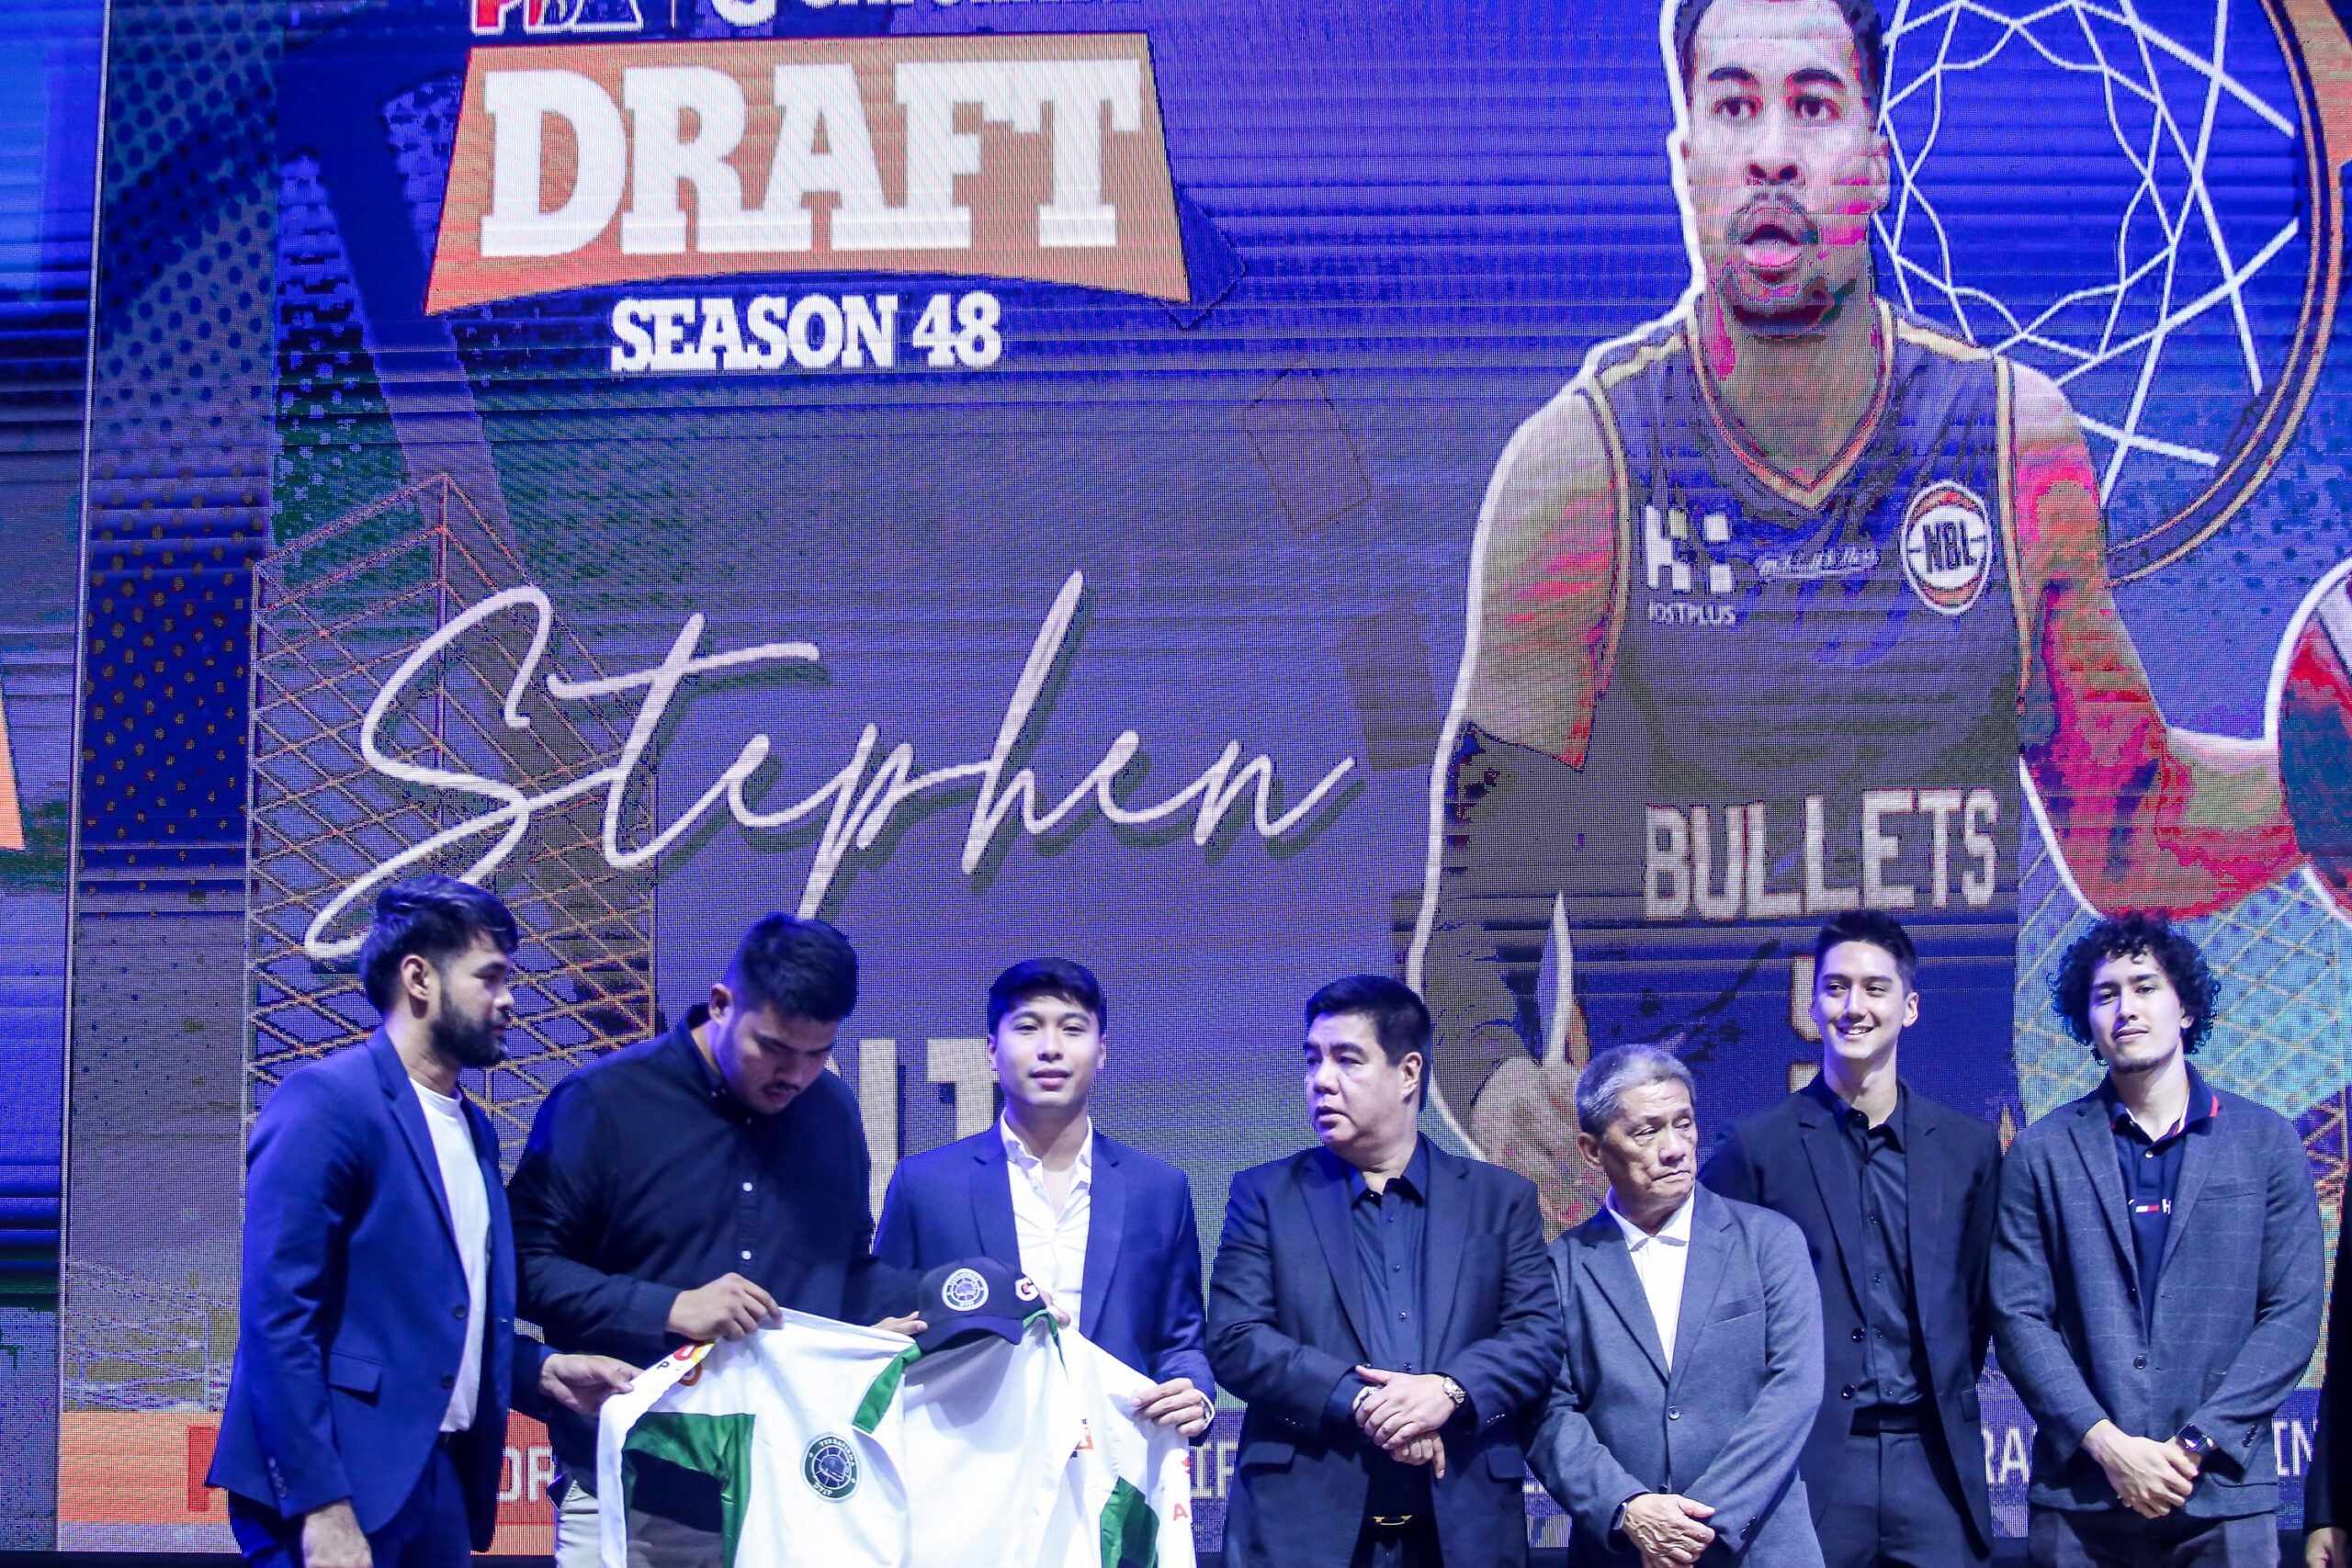 Stephen Holt (not present) is the no. 1 overall pick by Terrafirma in the 2023 PBA Draft.